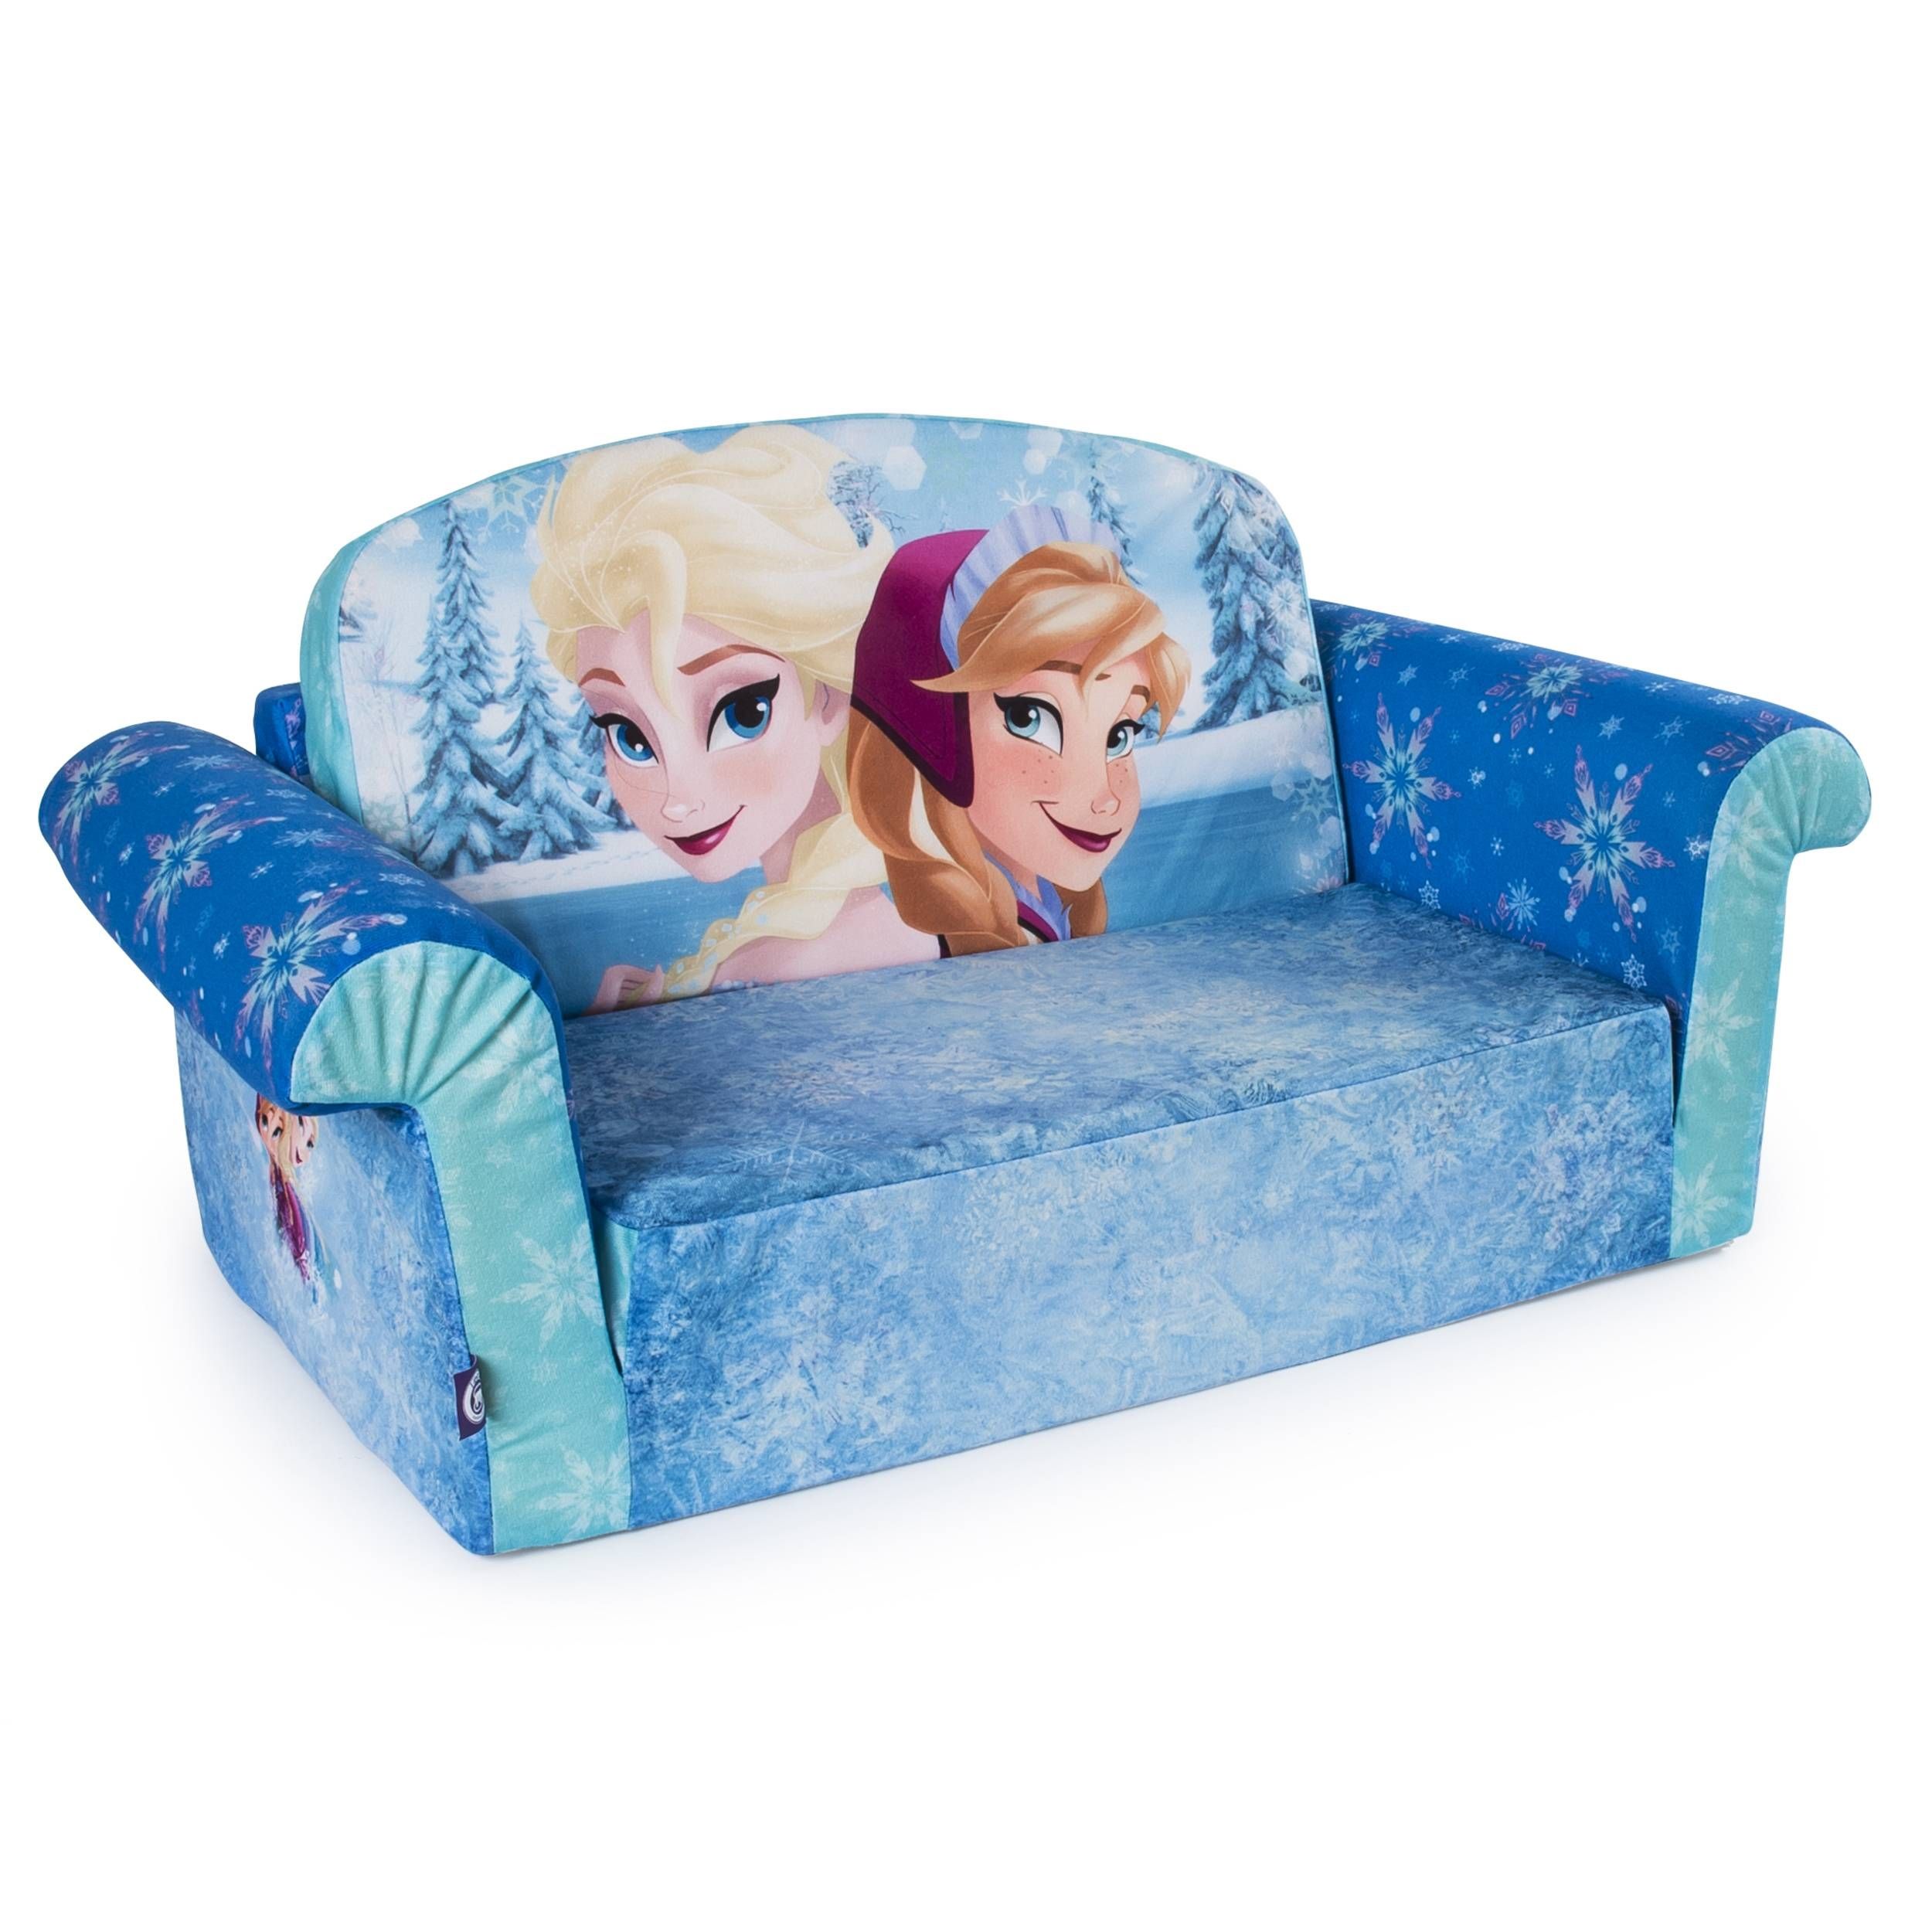 Marshmallow Furniture, Children's 2 In 1 Flip Open Foam Sofa Intended For Disney Princess Couches (View 15 of 15)